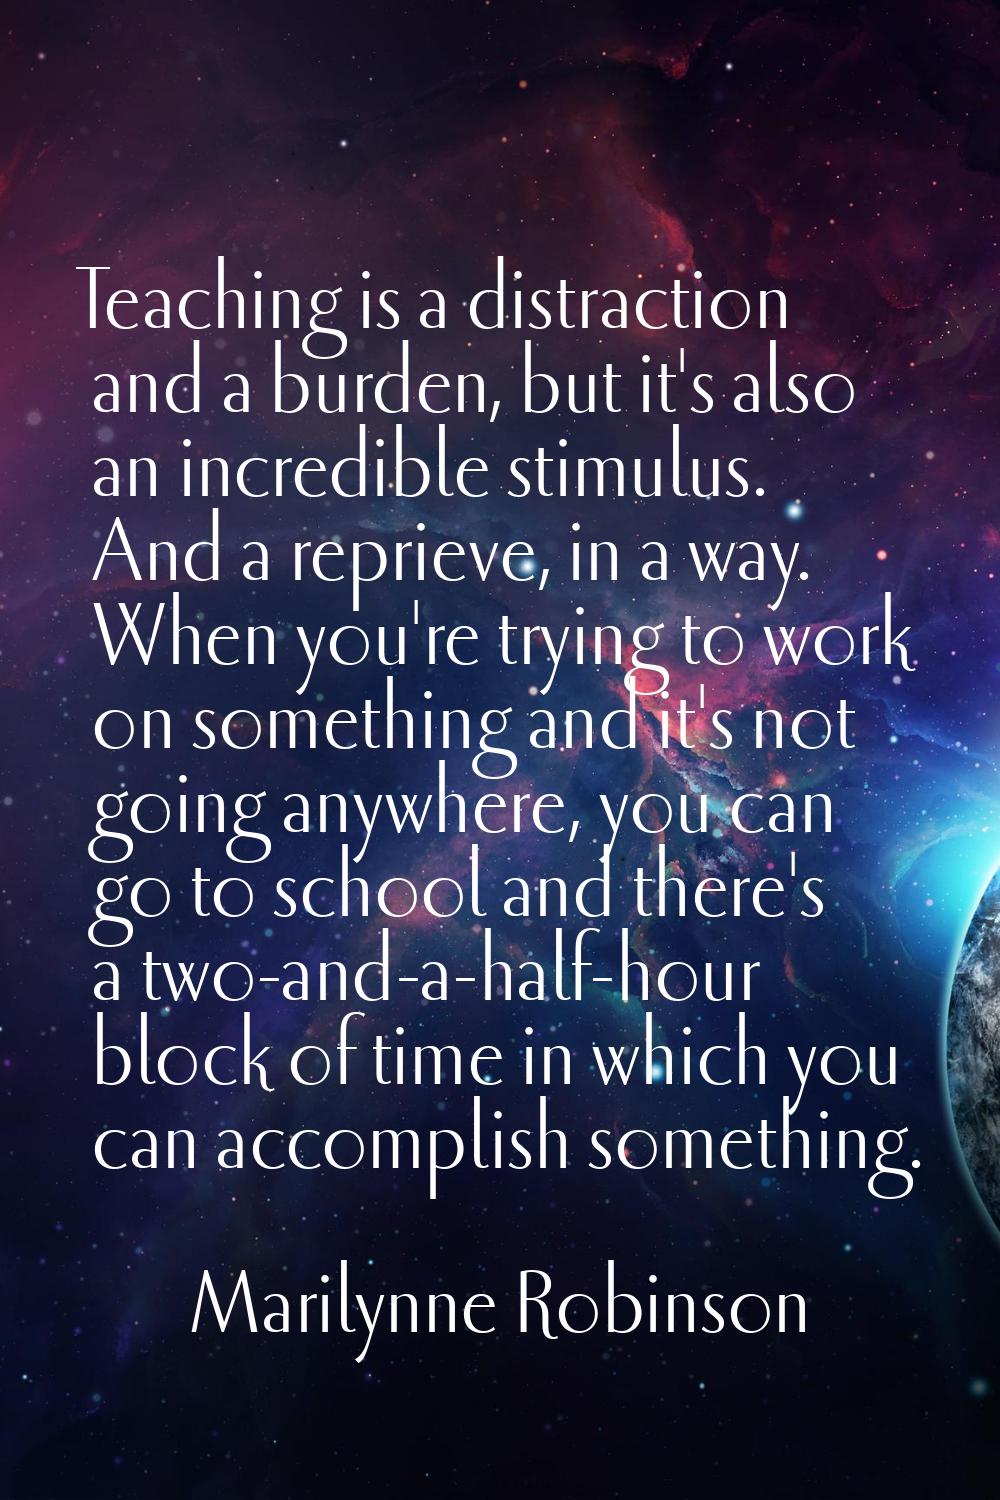 Teaching is a distraction and a burden, but it's also an incredible stimulus. And a reprieve, in a 